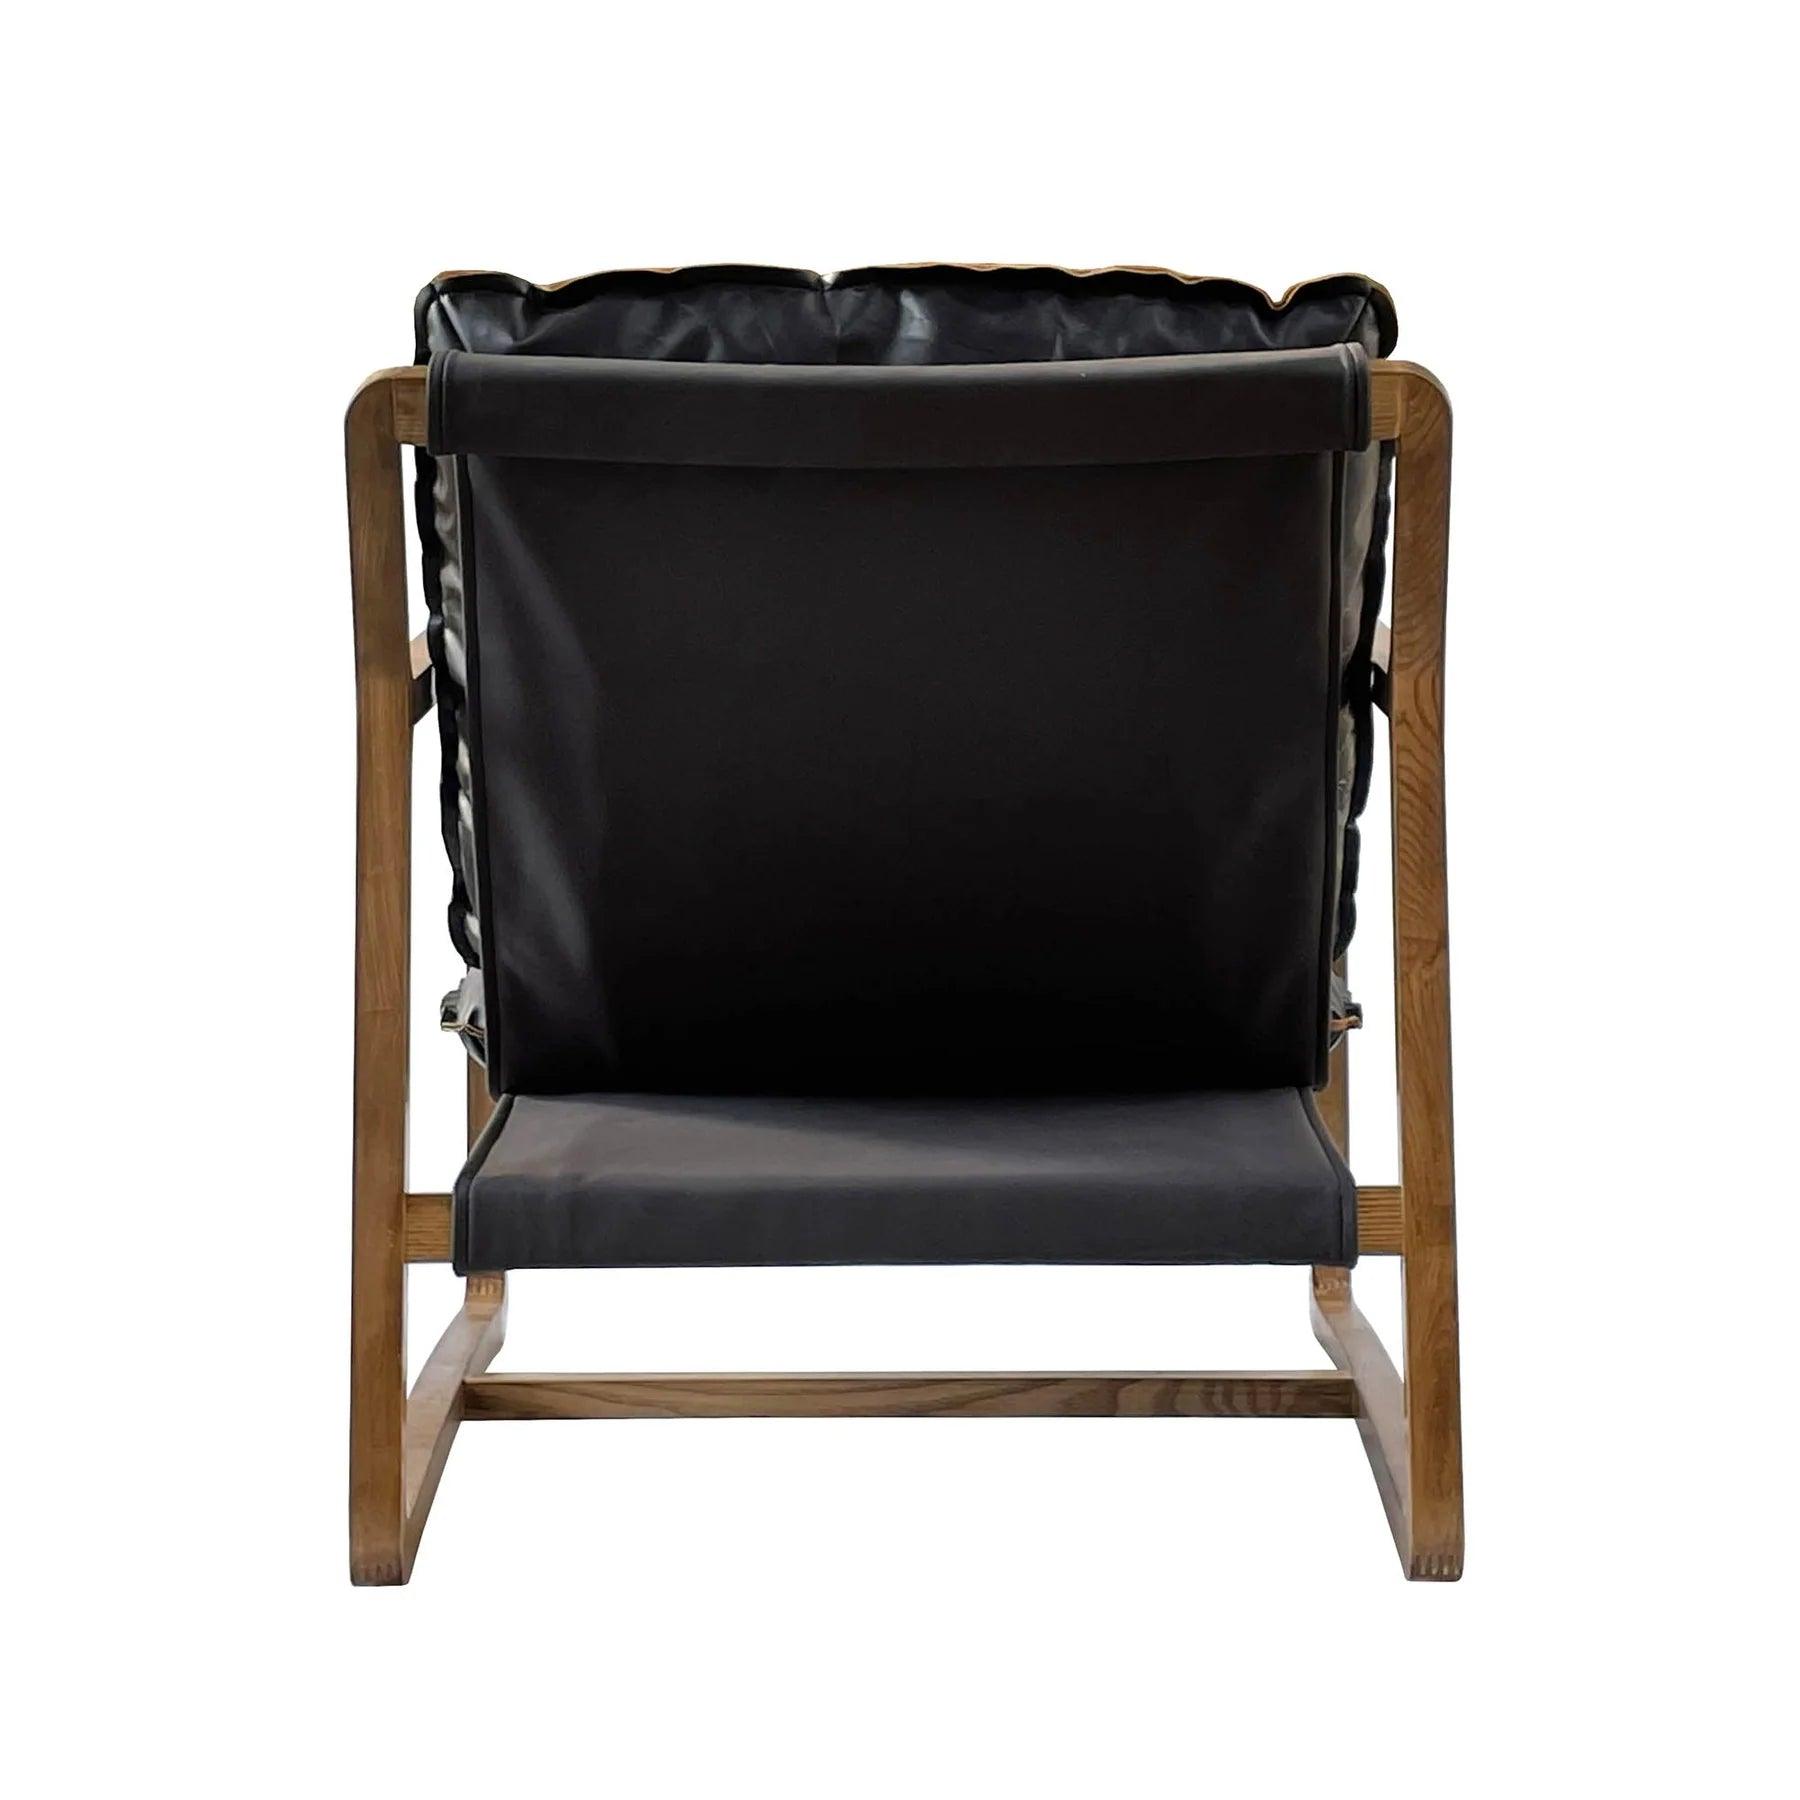 RELAX Black Leather Club Chair - Northern Interiors